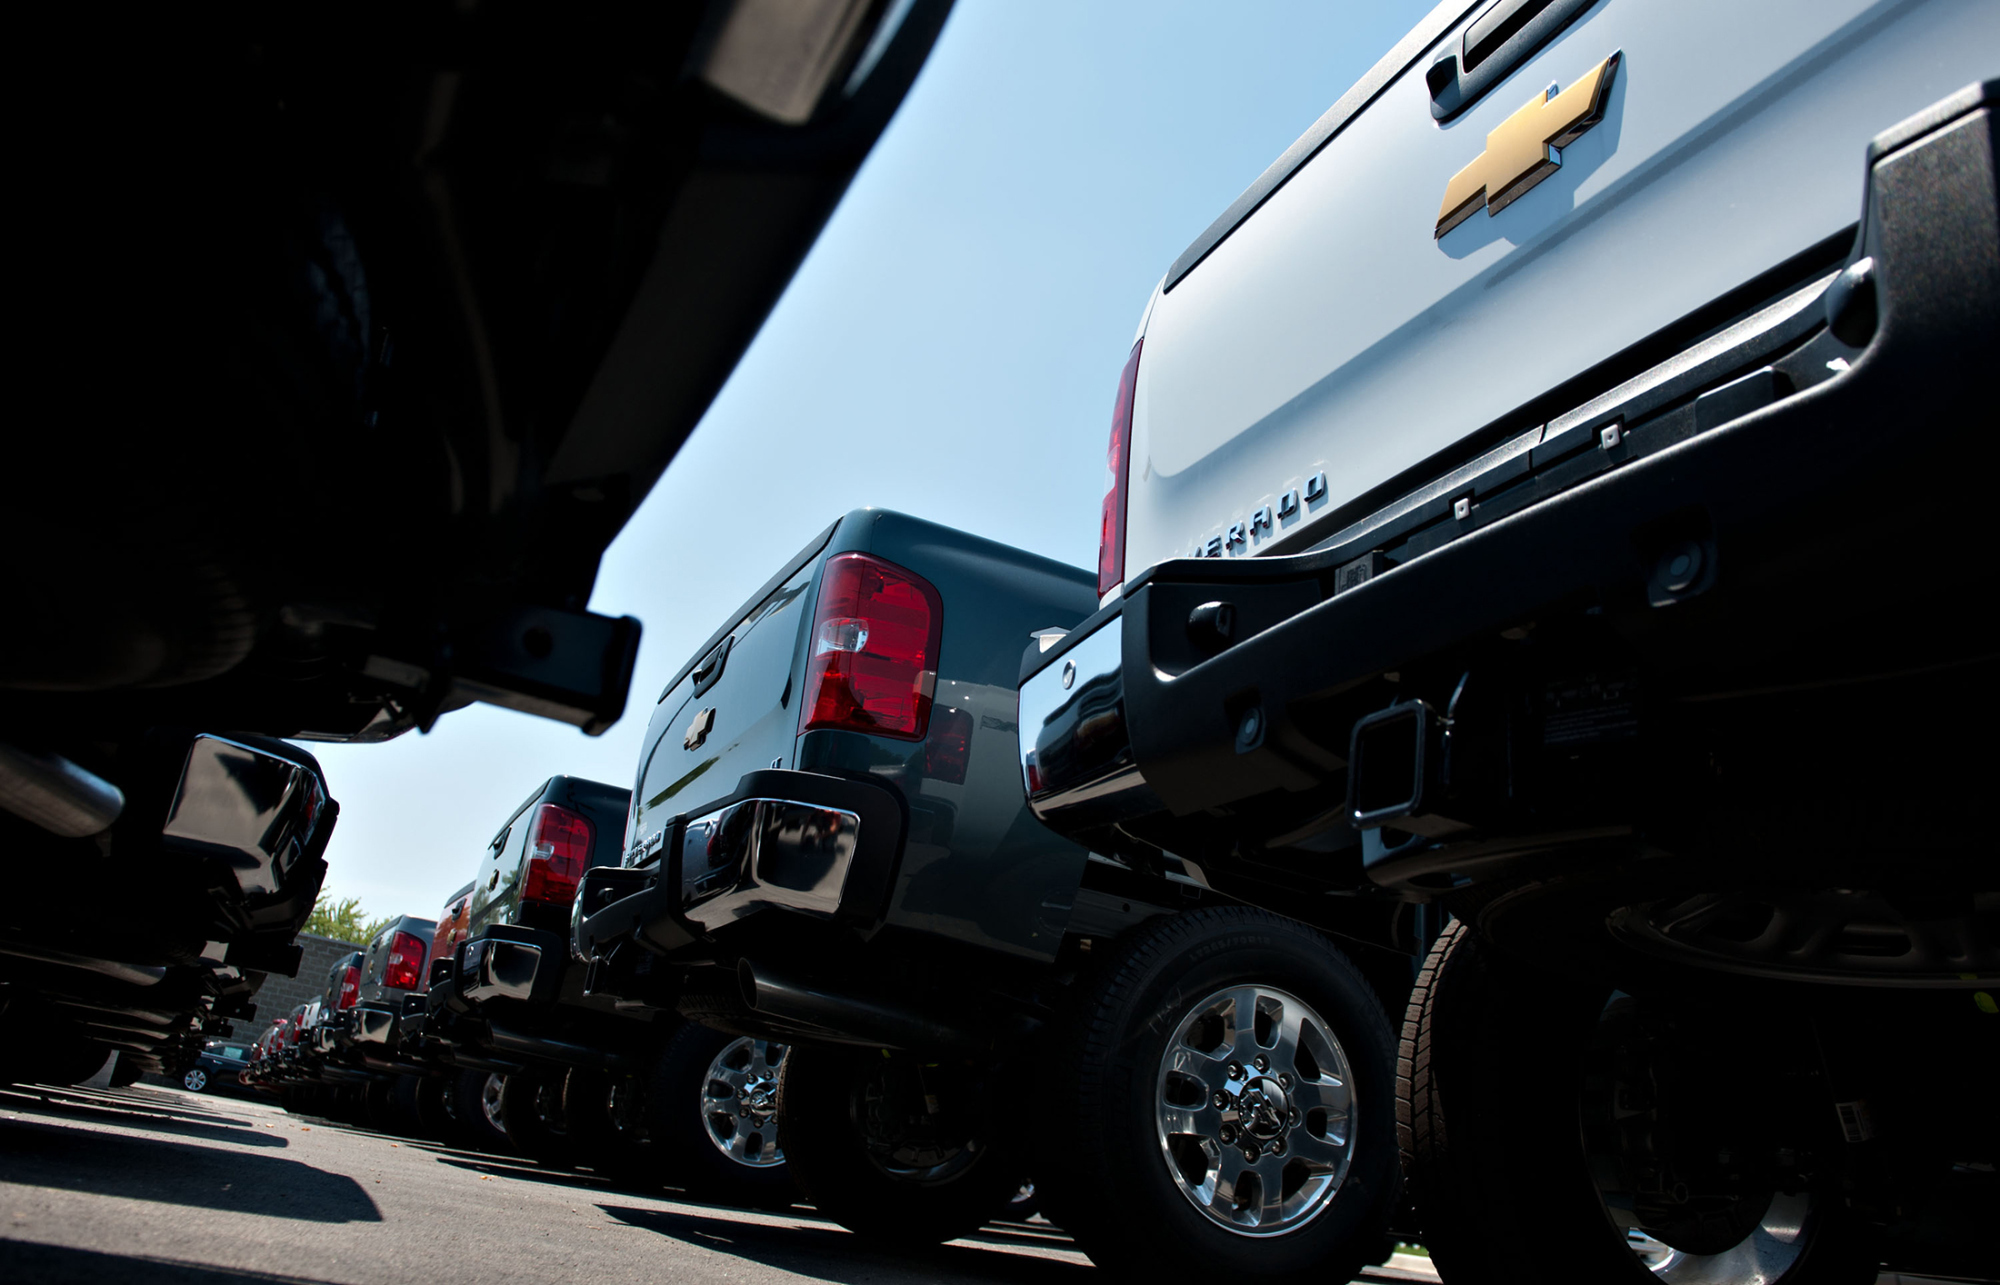 Chevy Silverado pickup trucks sit on display at a General Motors Co. dealership in Peoria, Illinois, U.S., on Wednesday, Aug. 1, 2012. The company's second-quarter results, GM’s 10th straight profitable quarter, were helped by continued profits in North America and Asia where sales have been growing.
